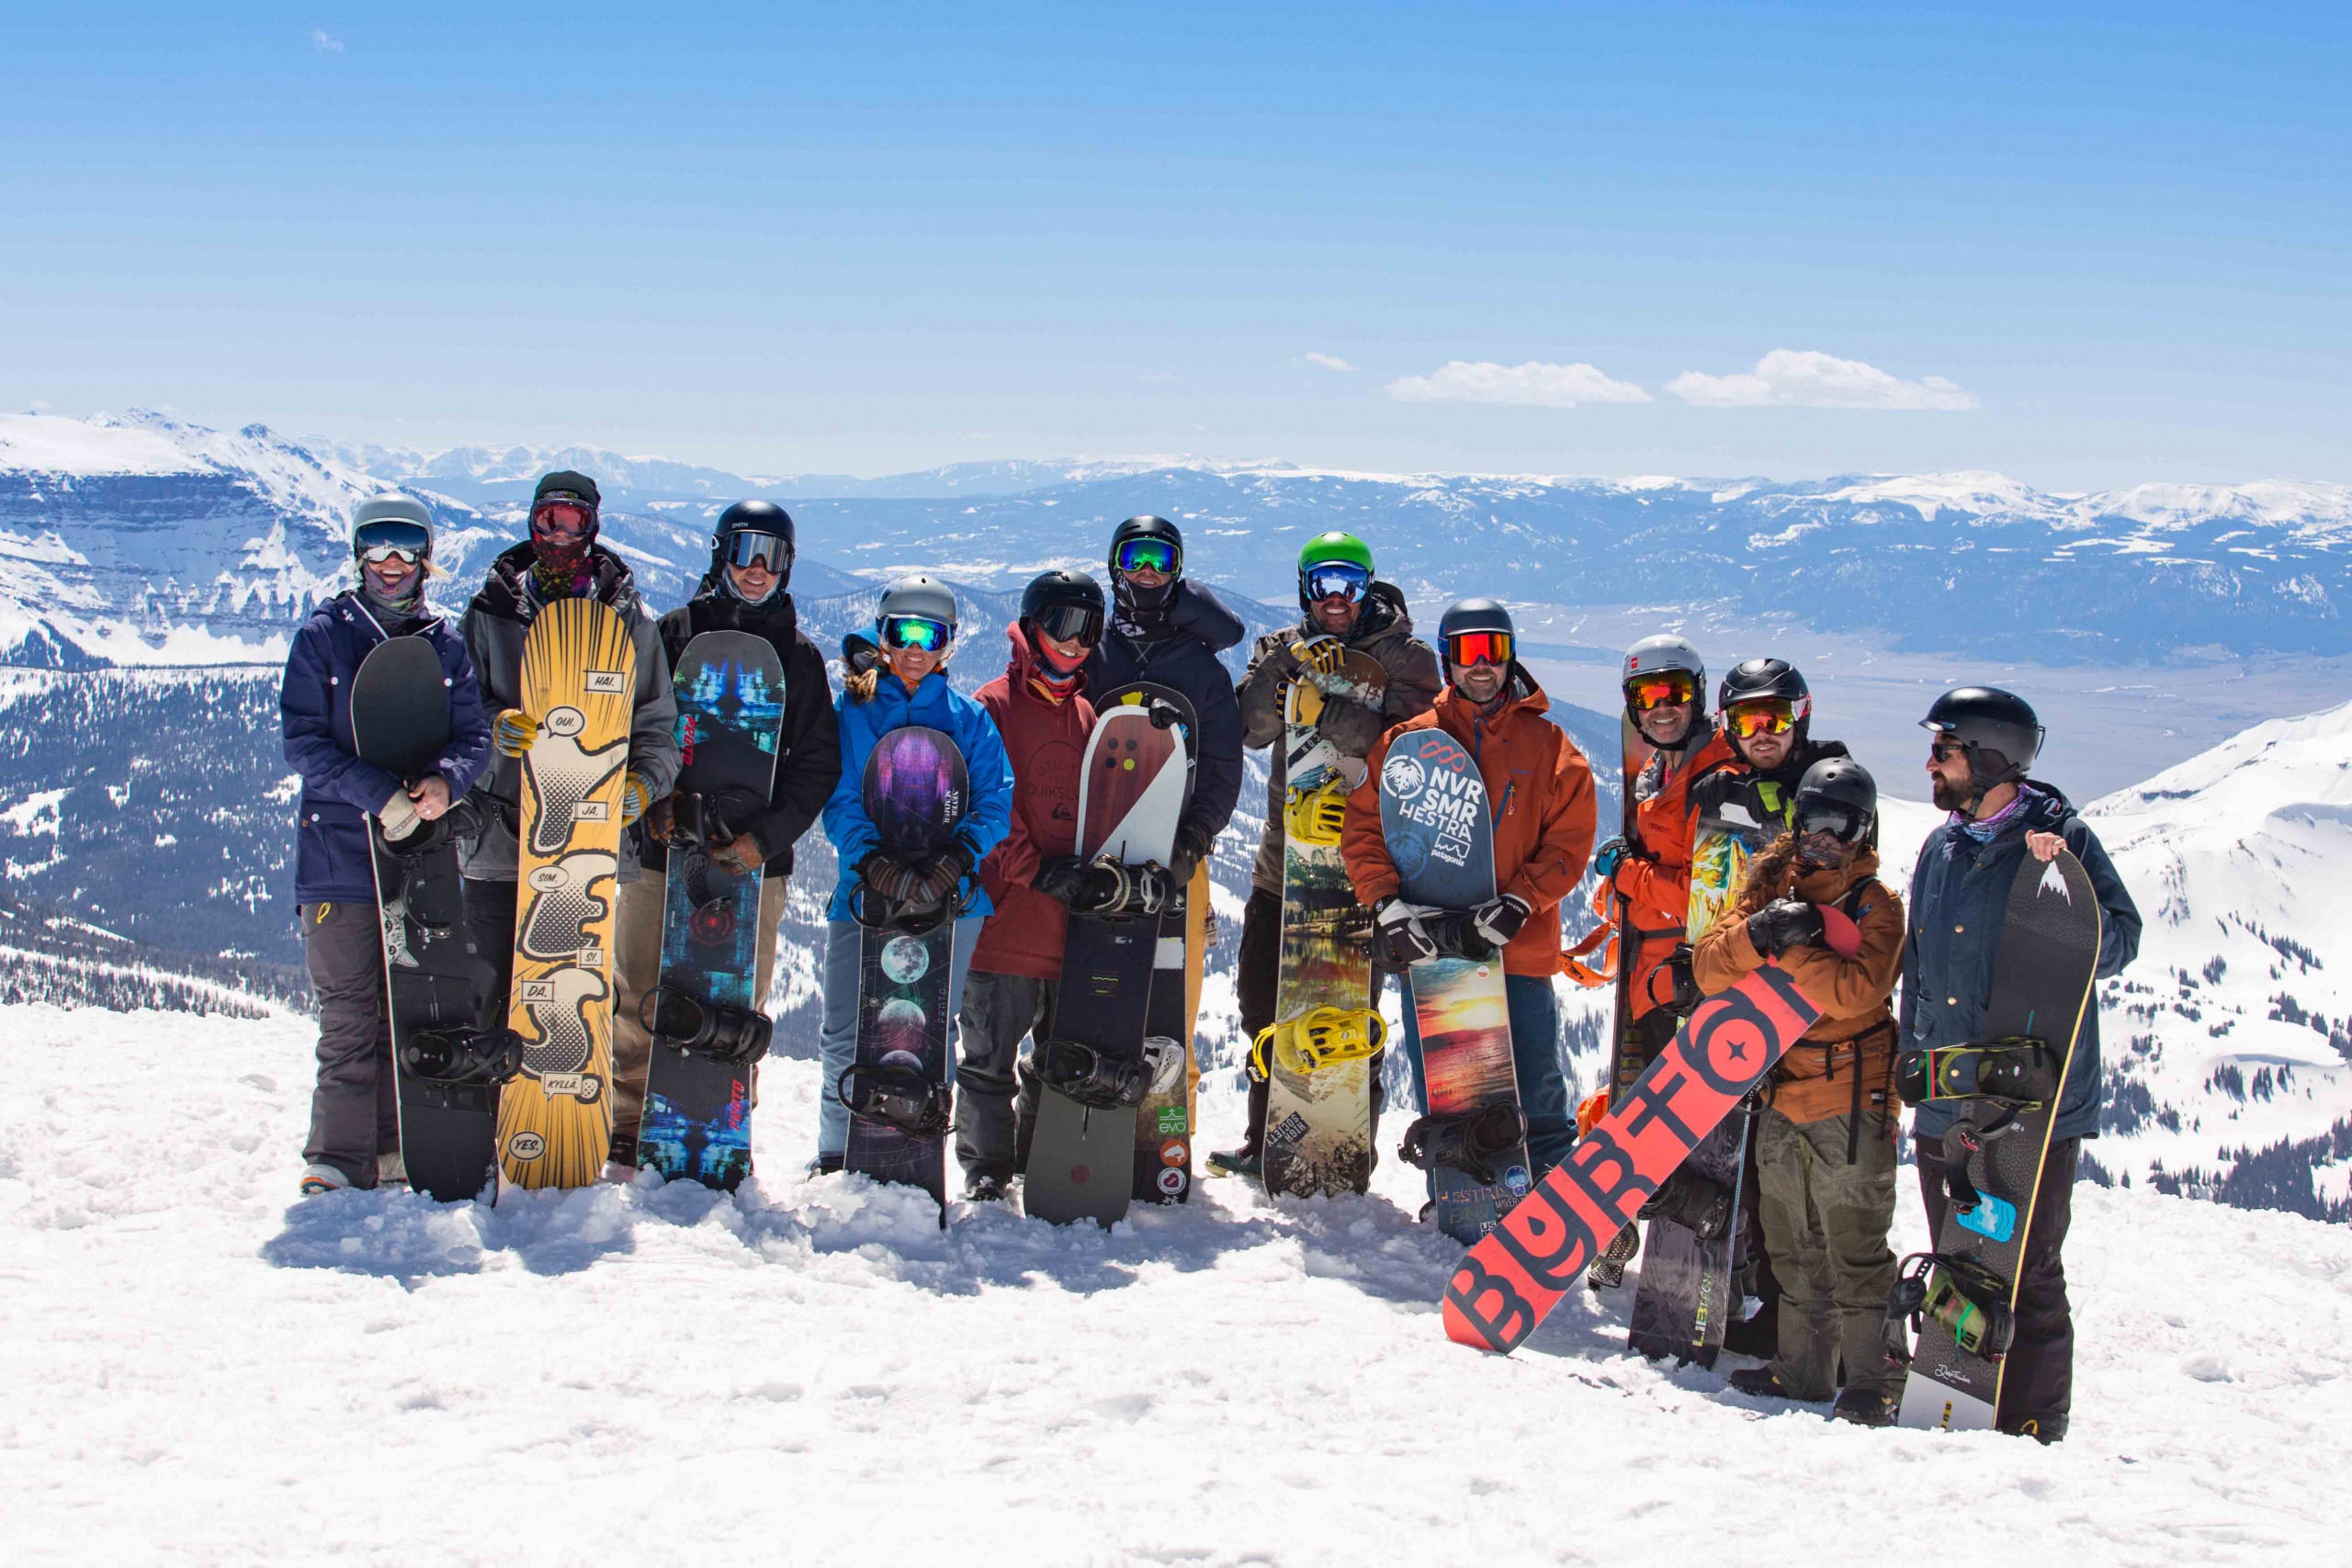 Snowboarders at Rider Rally 2019